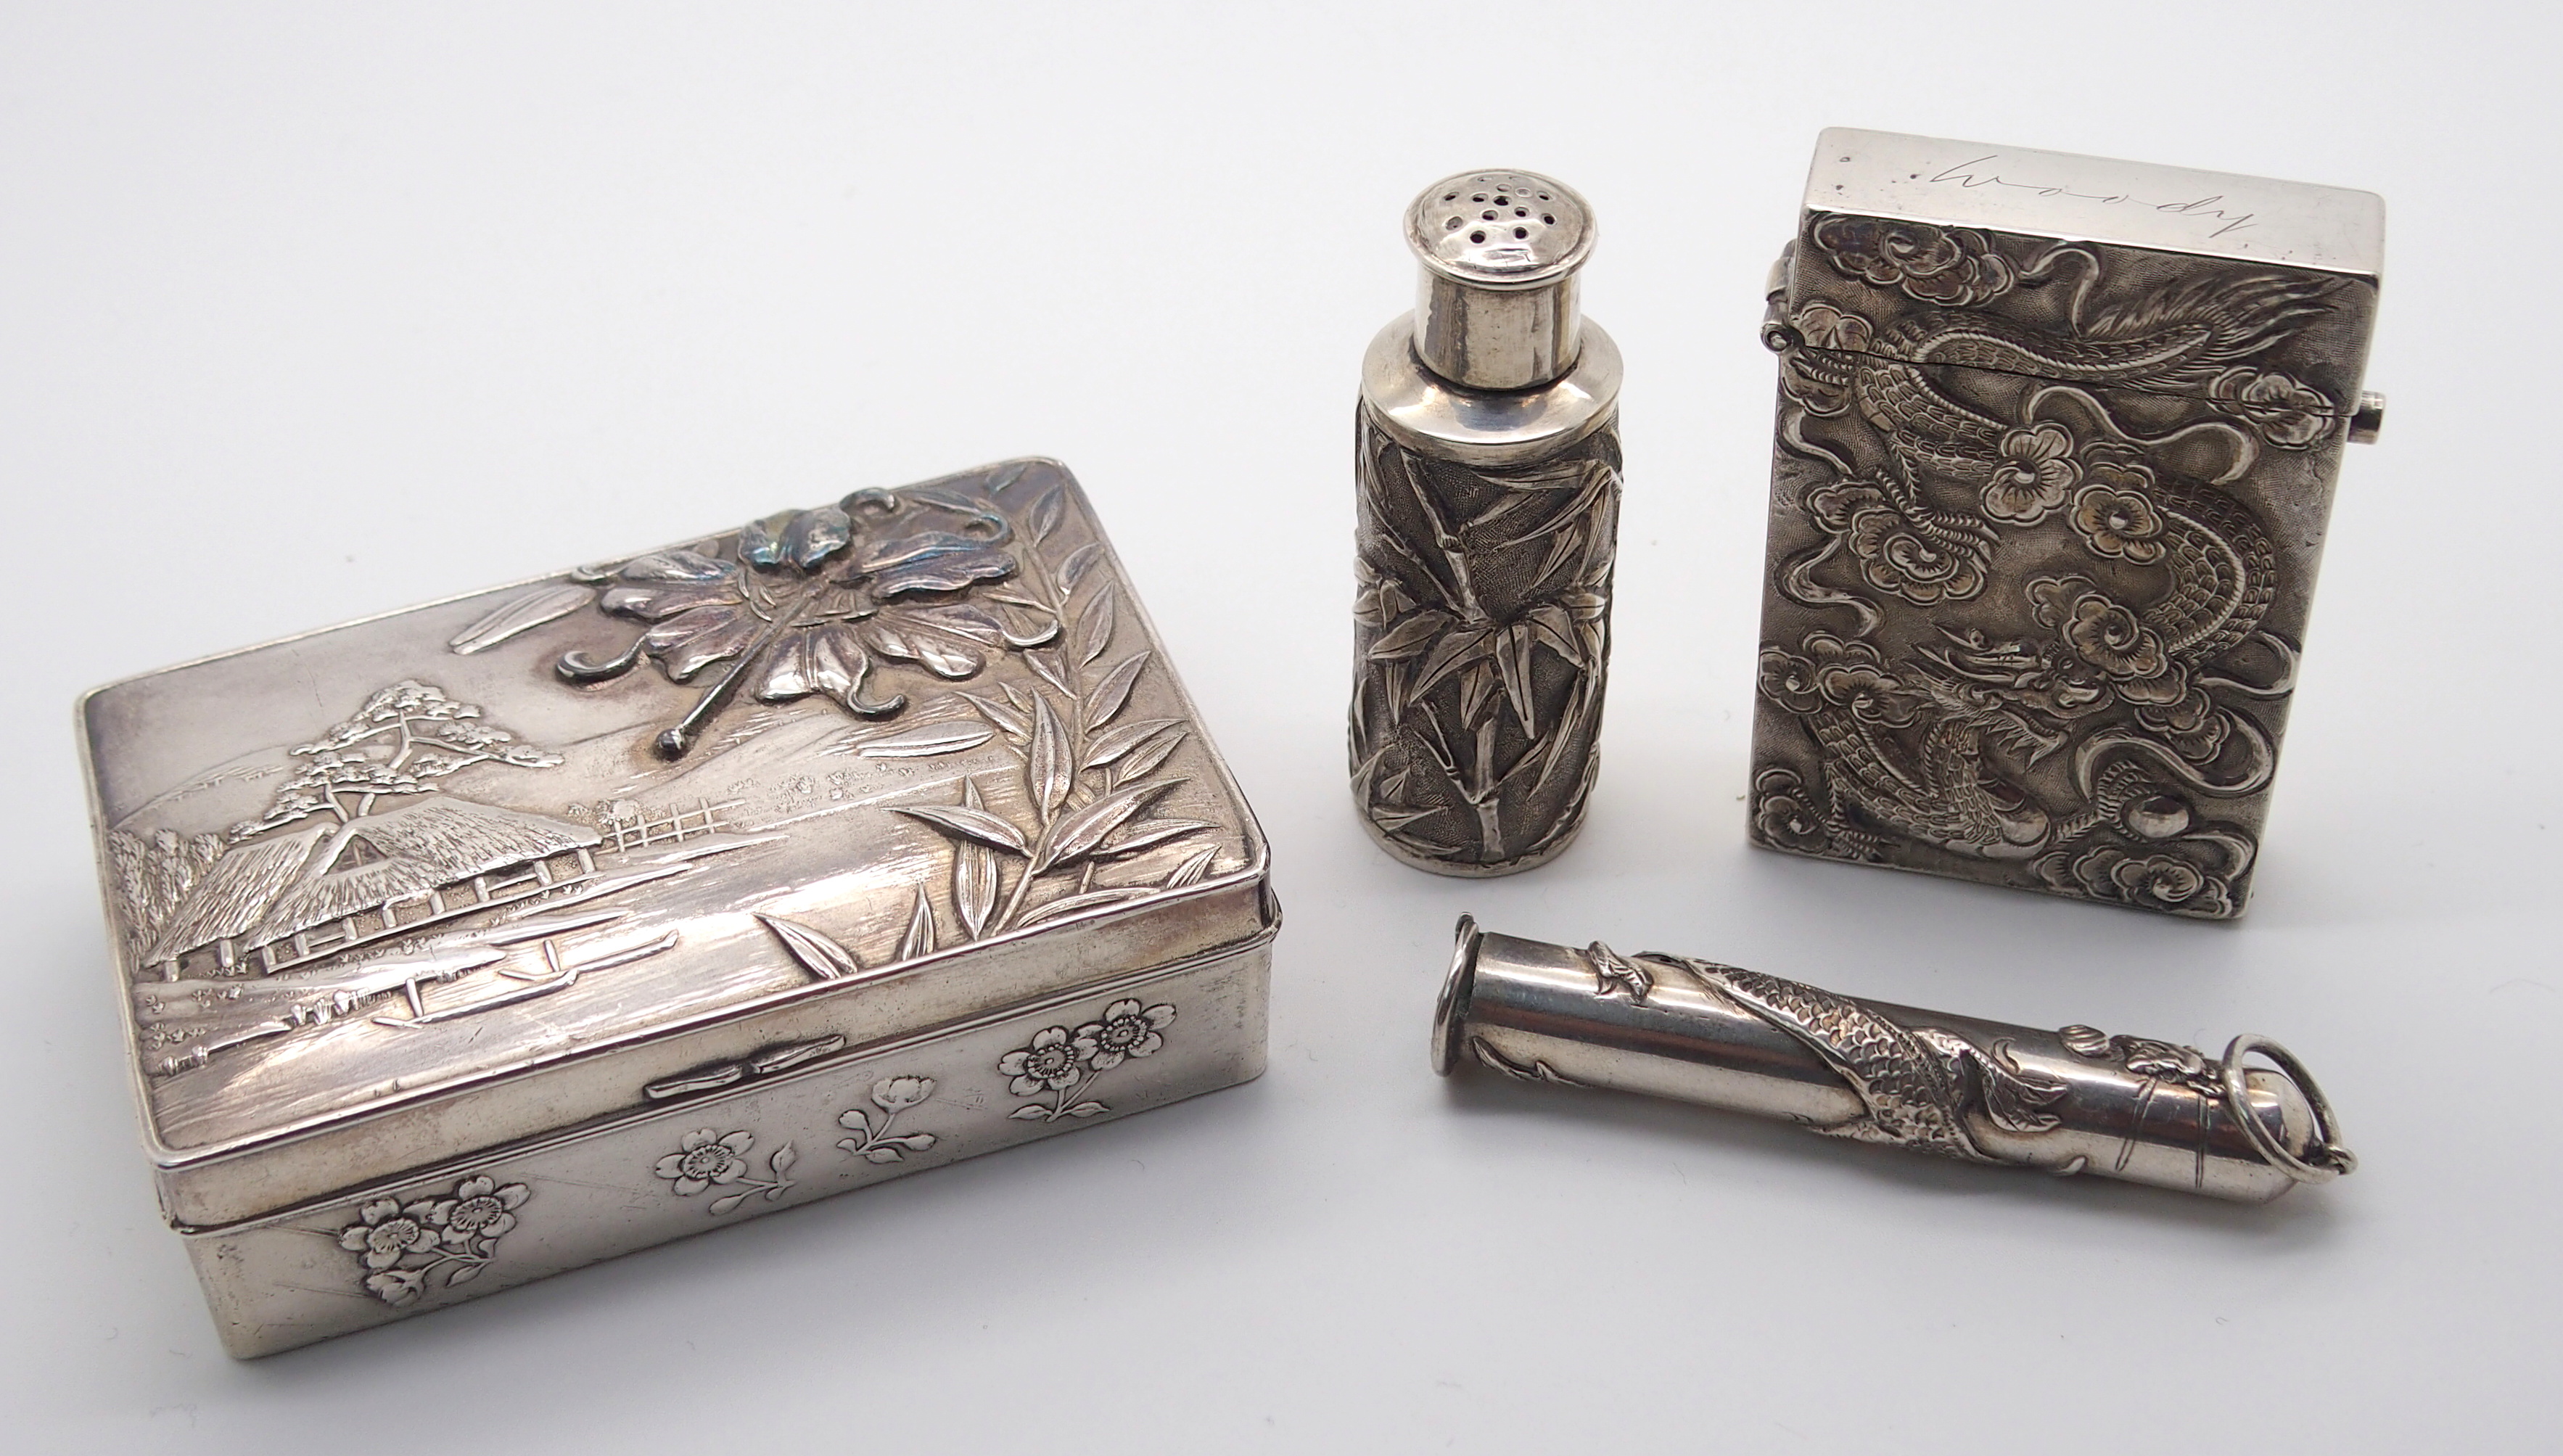 A CHINESE SILVER PEPPER CASTOR decorated with bamboo, stamped WH 90, 5.5cm high, white metal